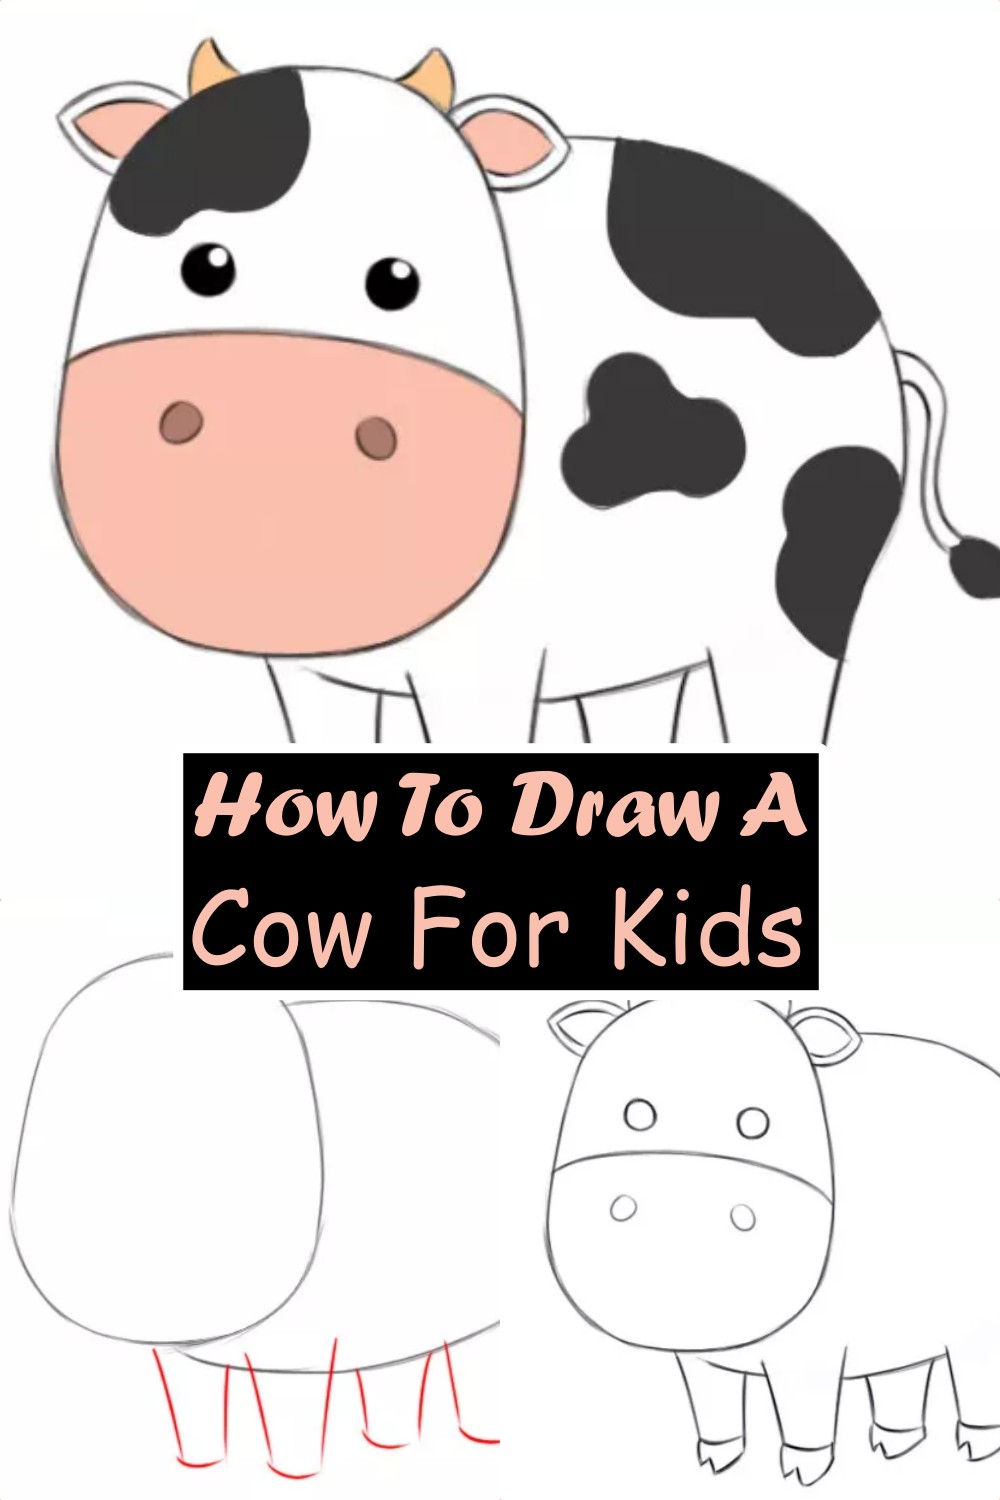 How To Draw A Cow For Kids